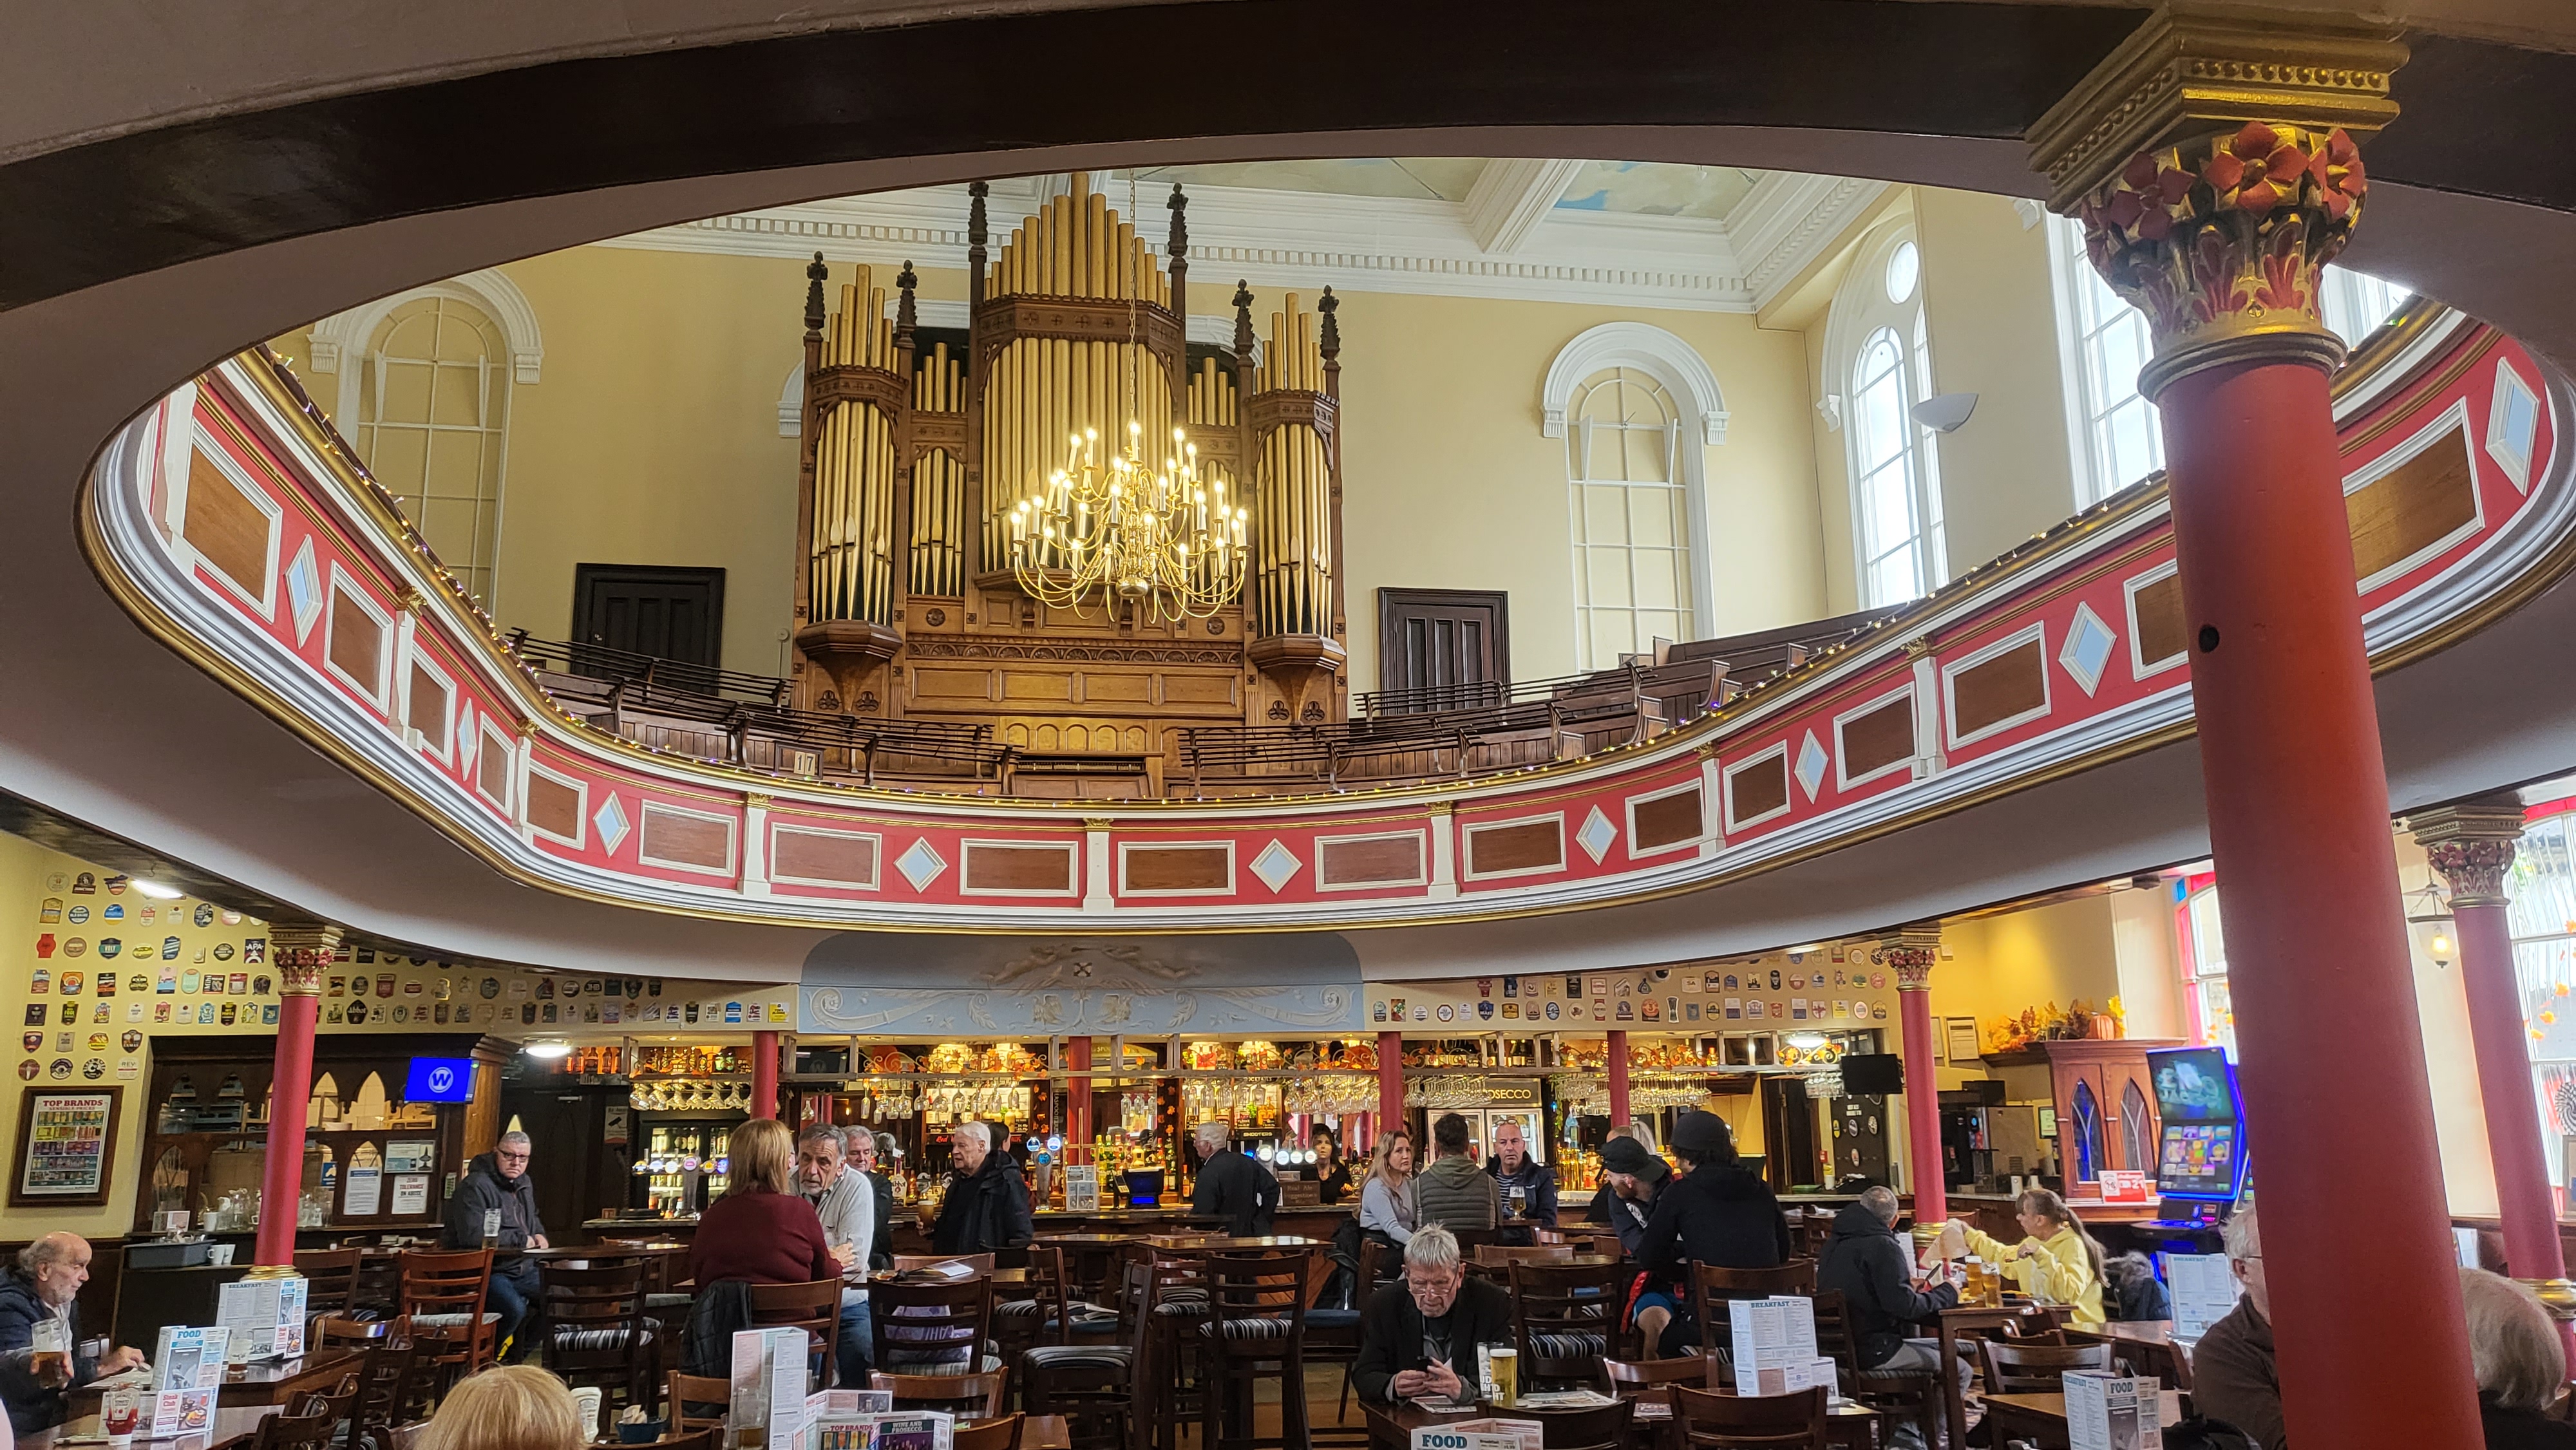 Interior of Brighouse Wetherspoons, showing balcony above bar and former chapel organ